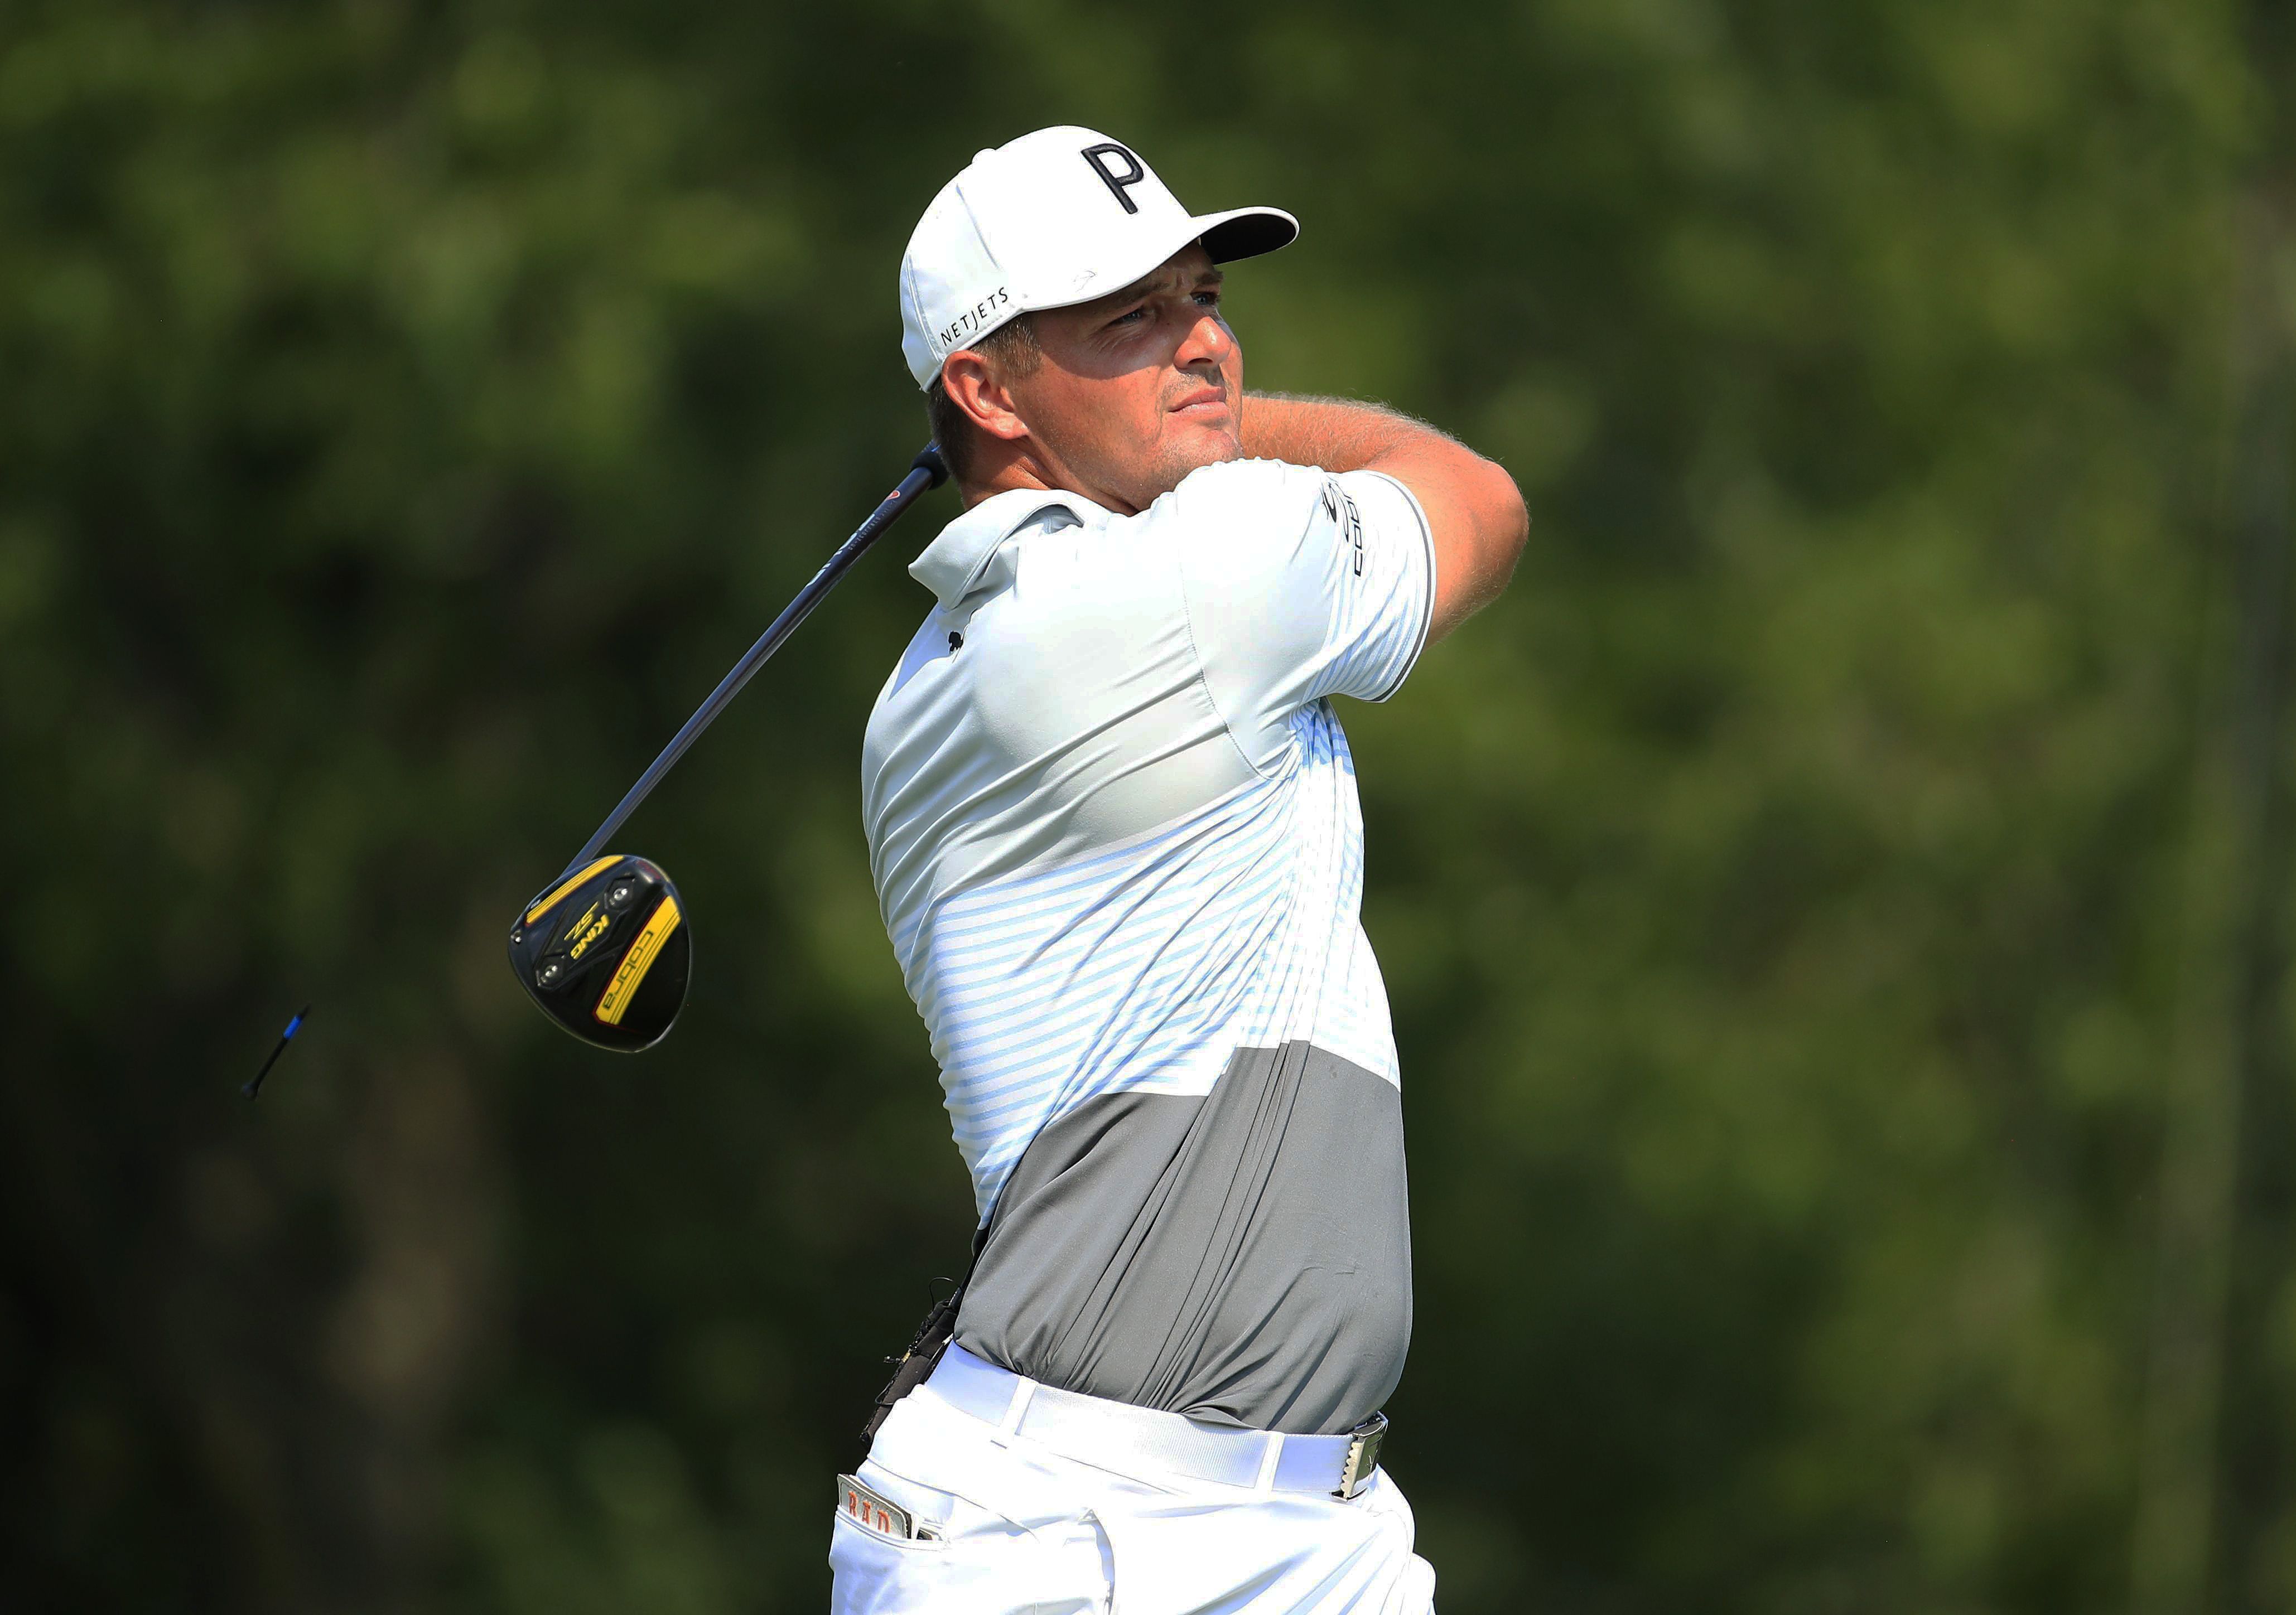 Can Bulked-Up Bryson DeChambeau's Body Last for the Long Haul